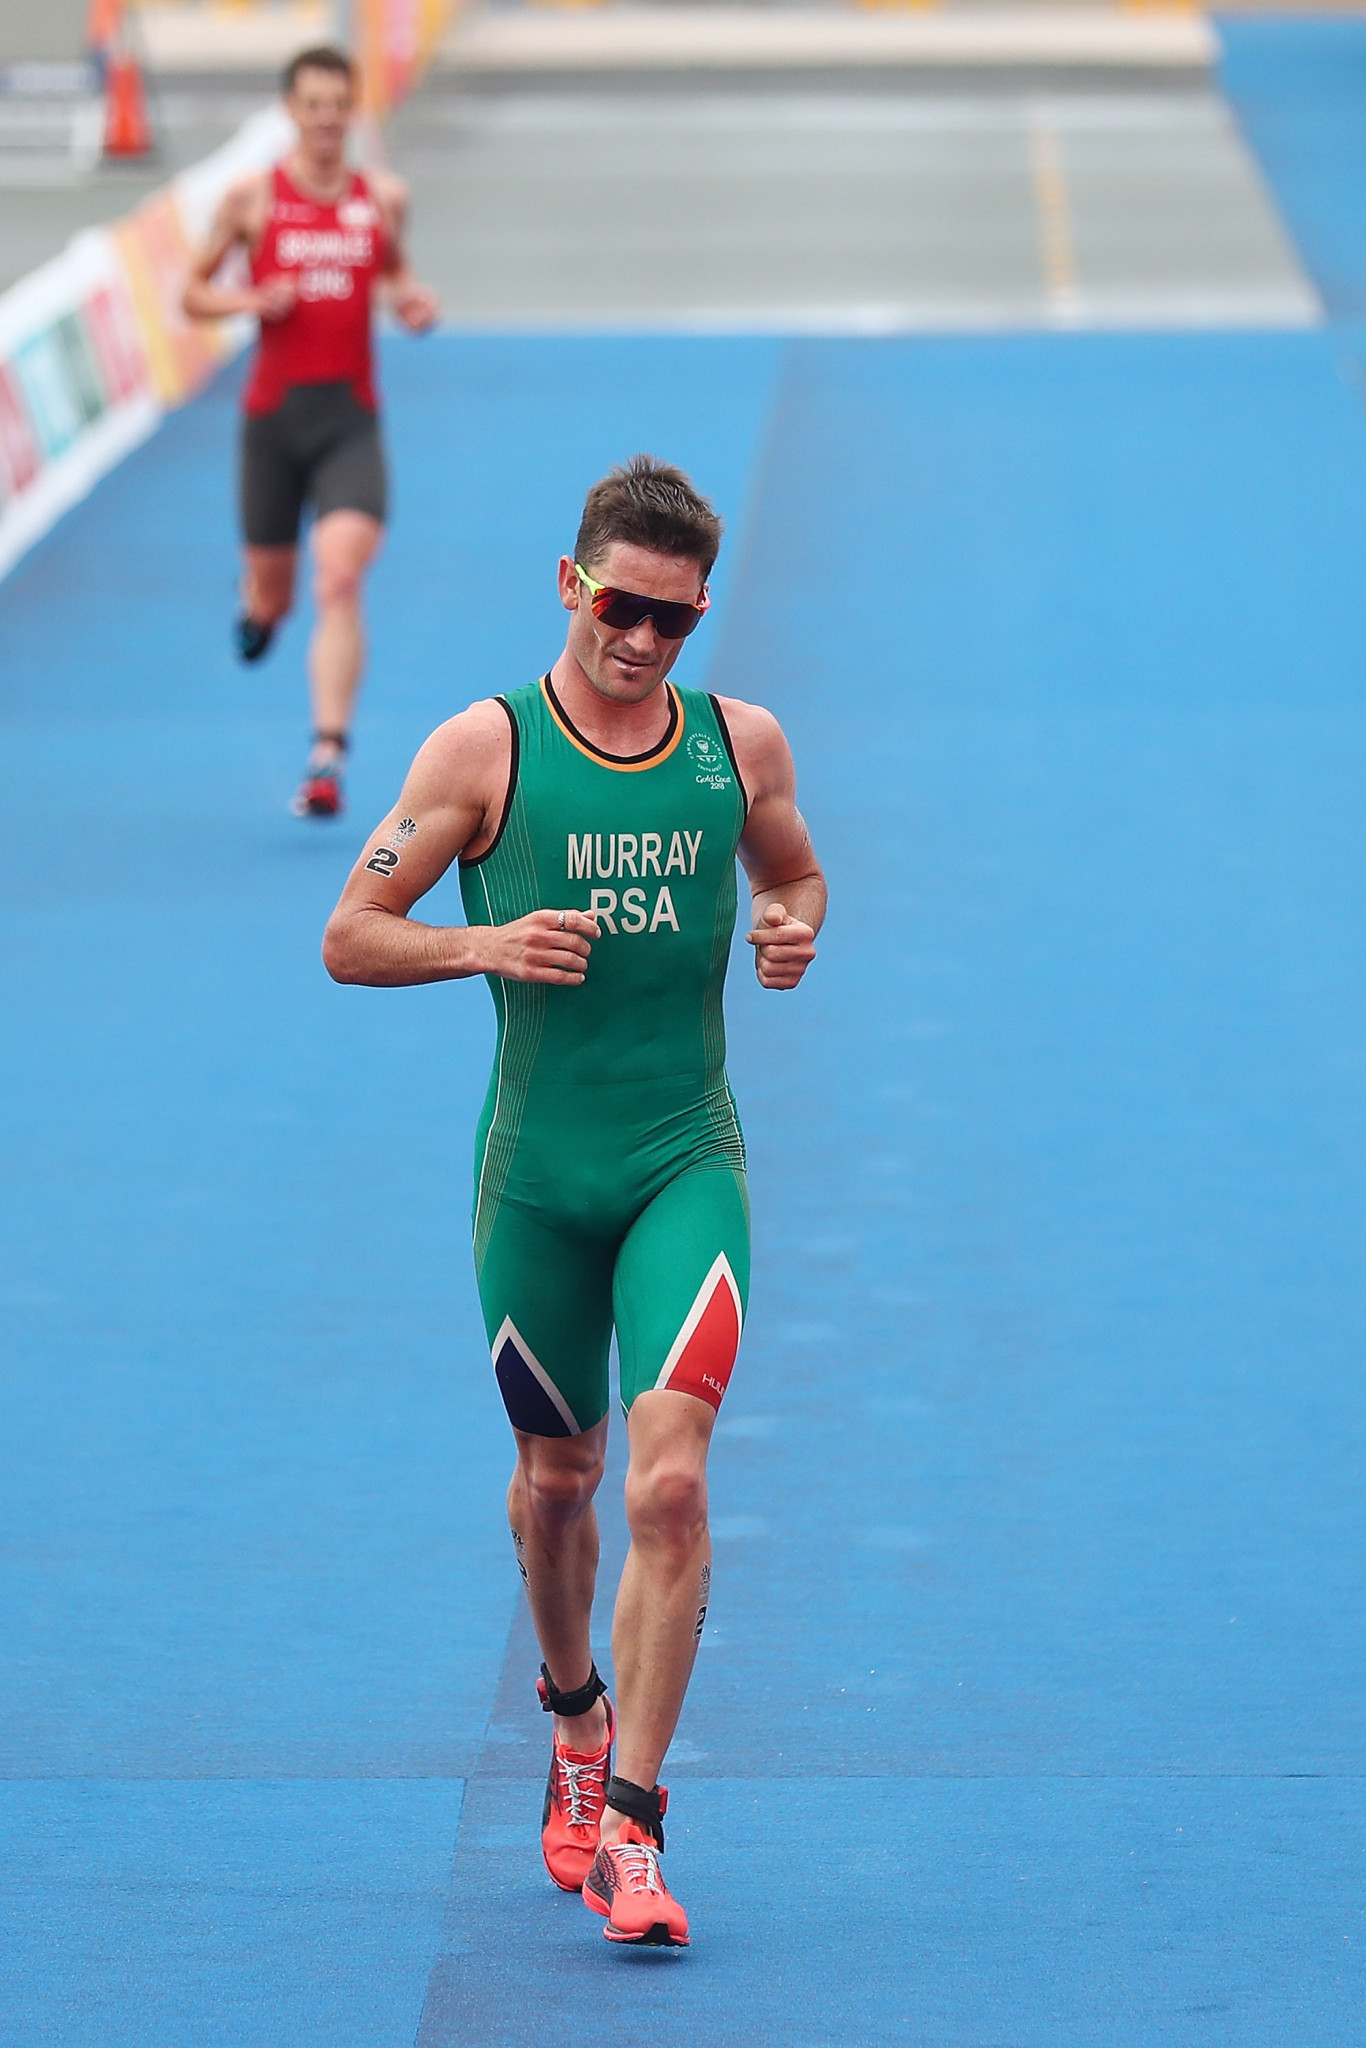 South Africa's Richard Murray won the men's race as the World Triathlon Series came to Leeds, after Britain's Jonny Brownlee had had to pull out during the race ©Getty Images  